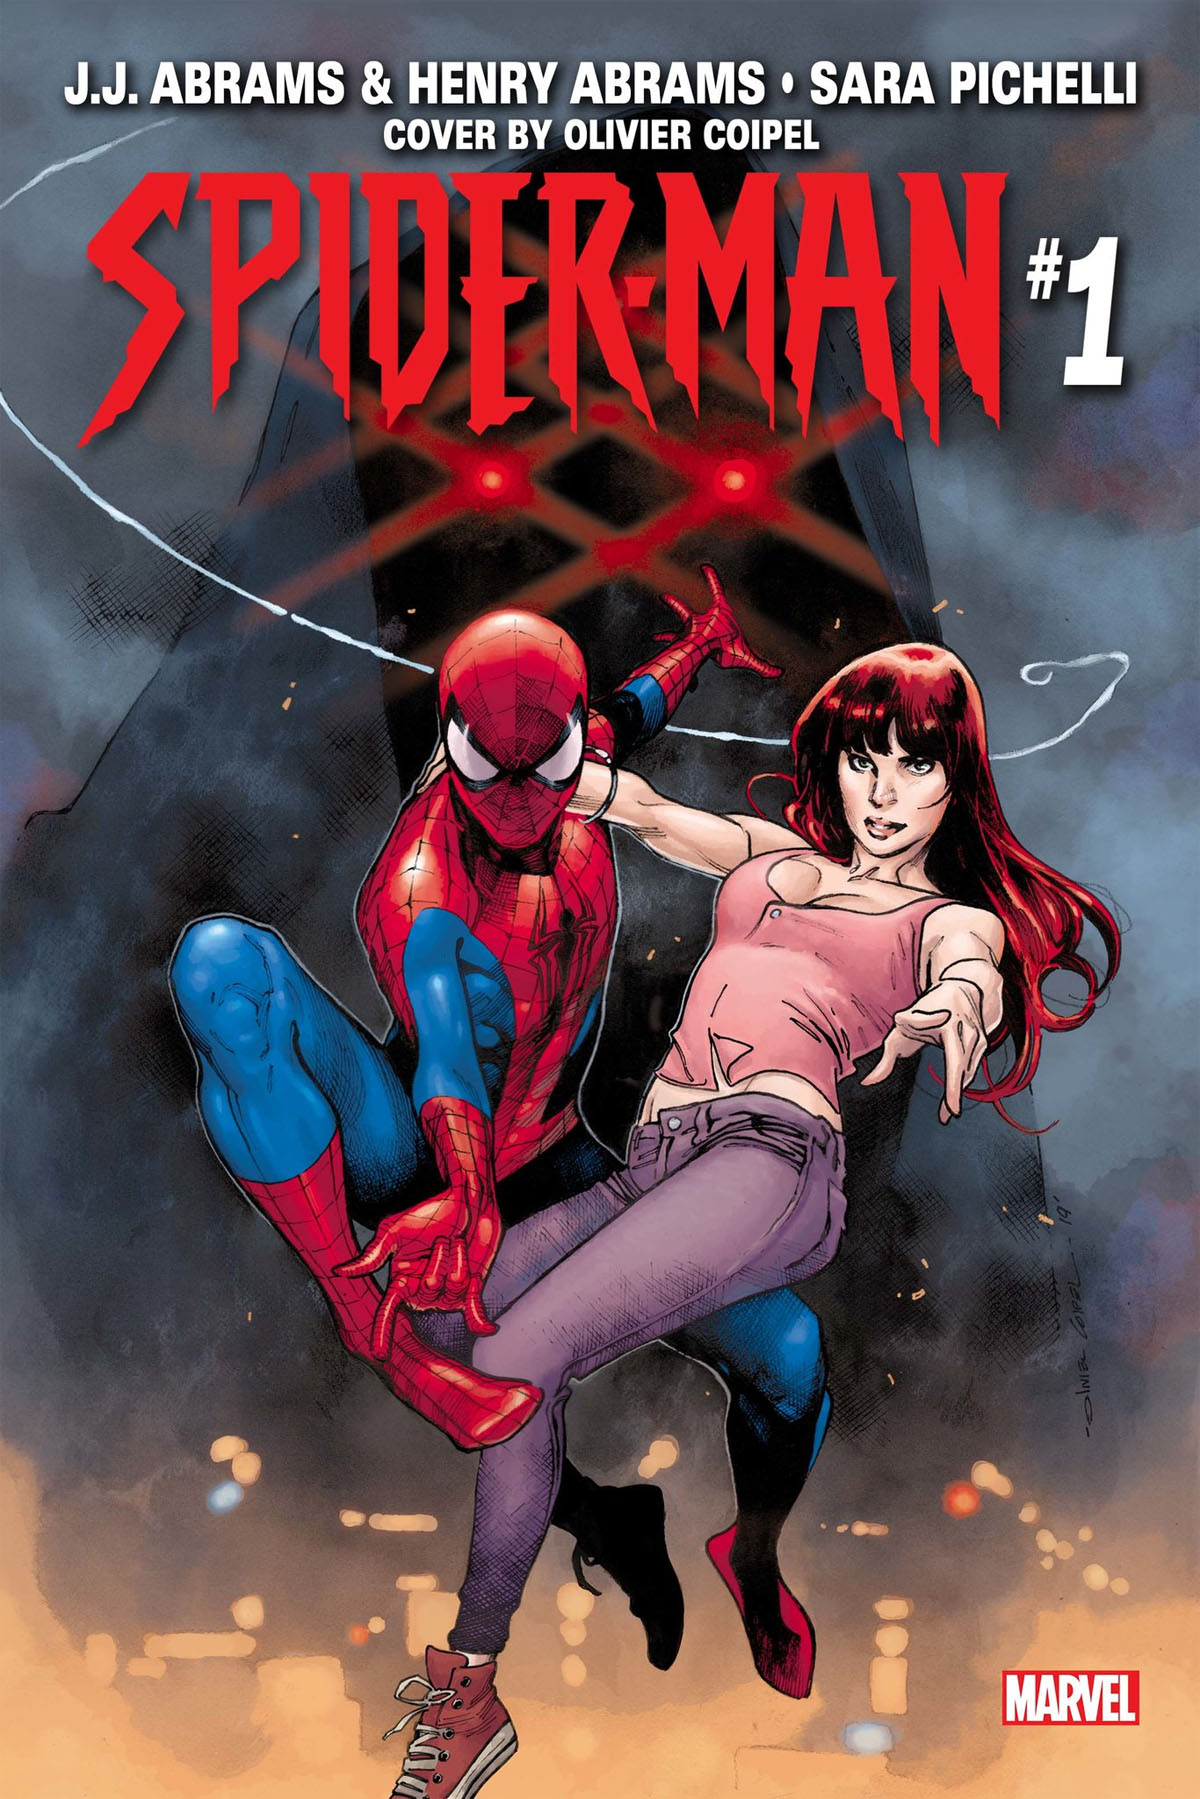 Spider-Man #1 cover